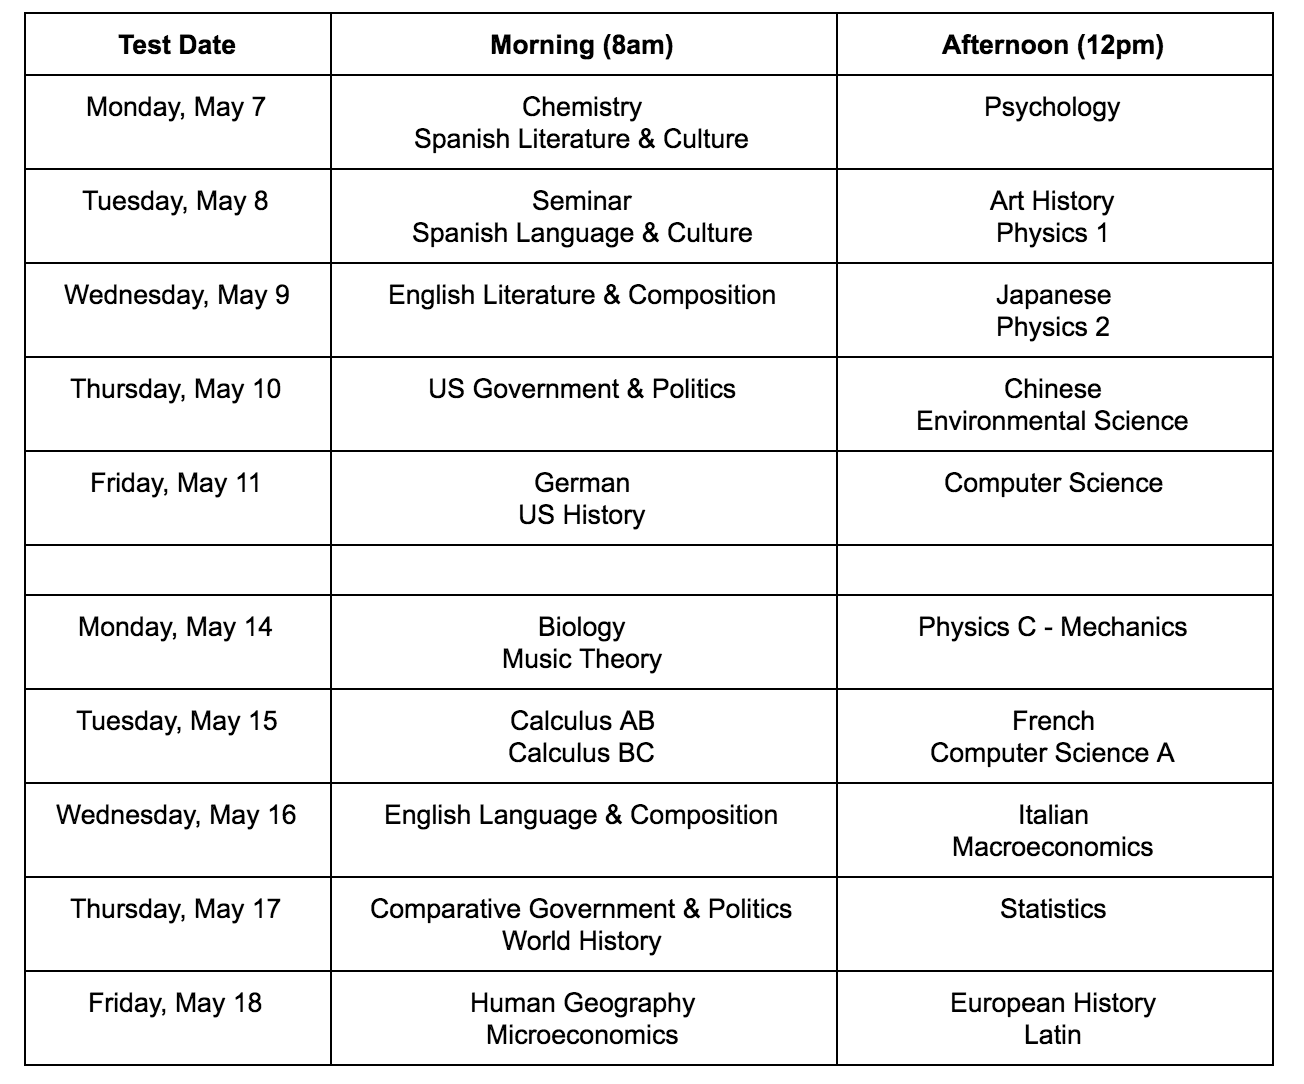 Source: https://apcentral.collegeboard.org/courses/exam-dates-and-fees